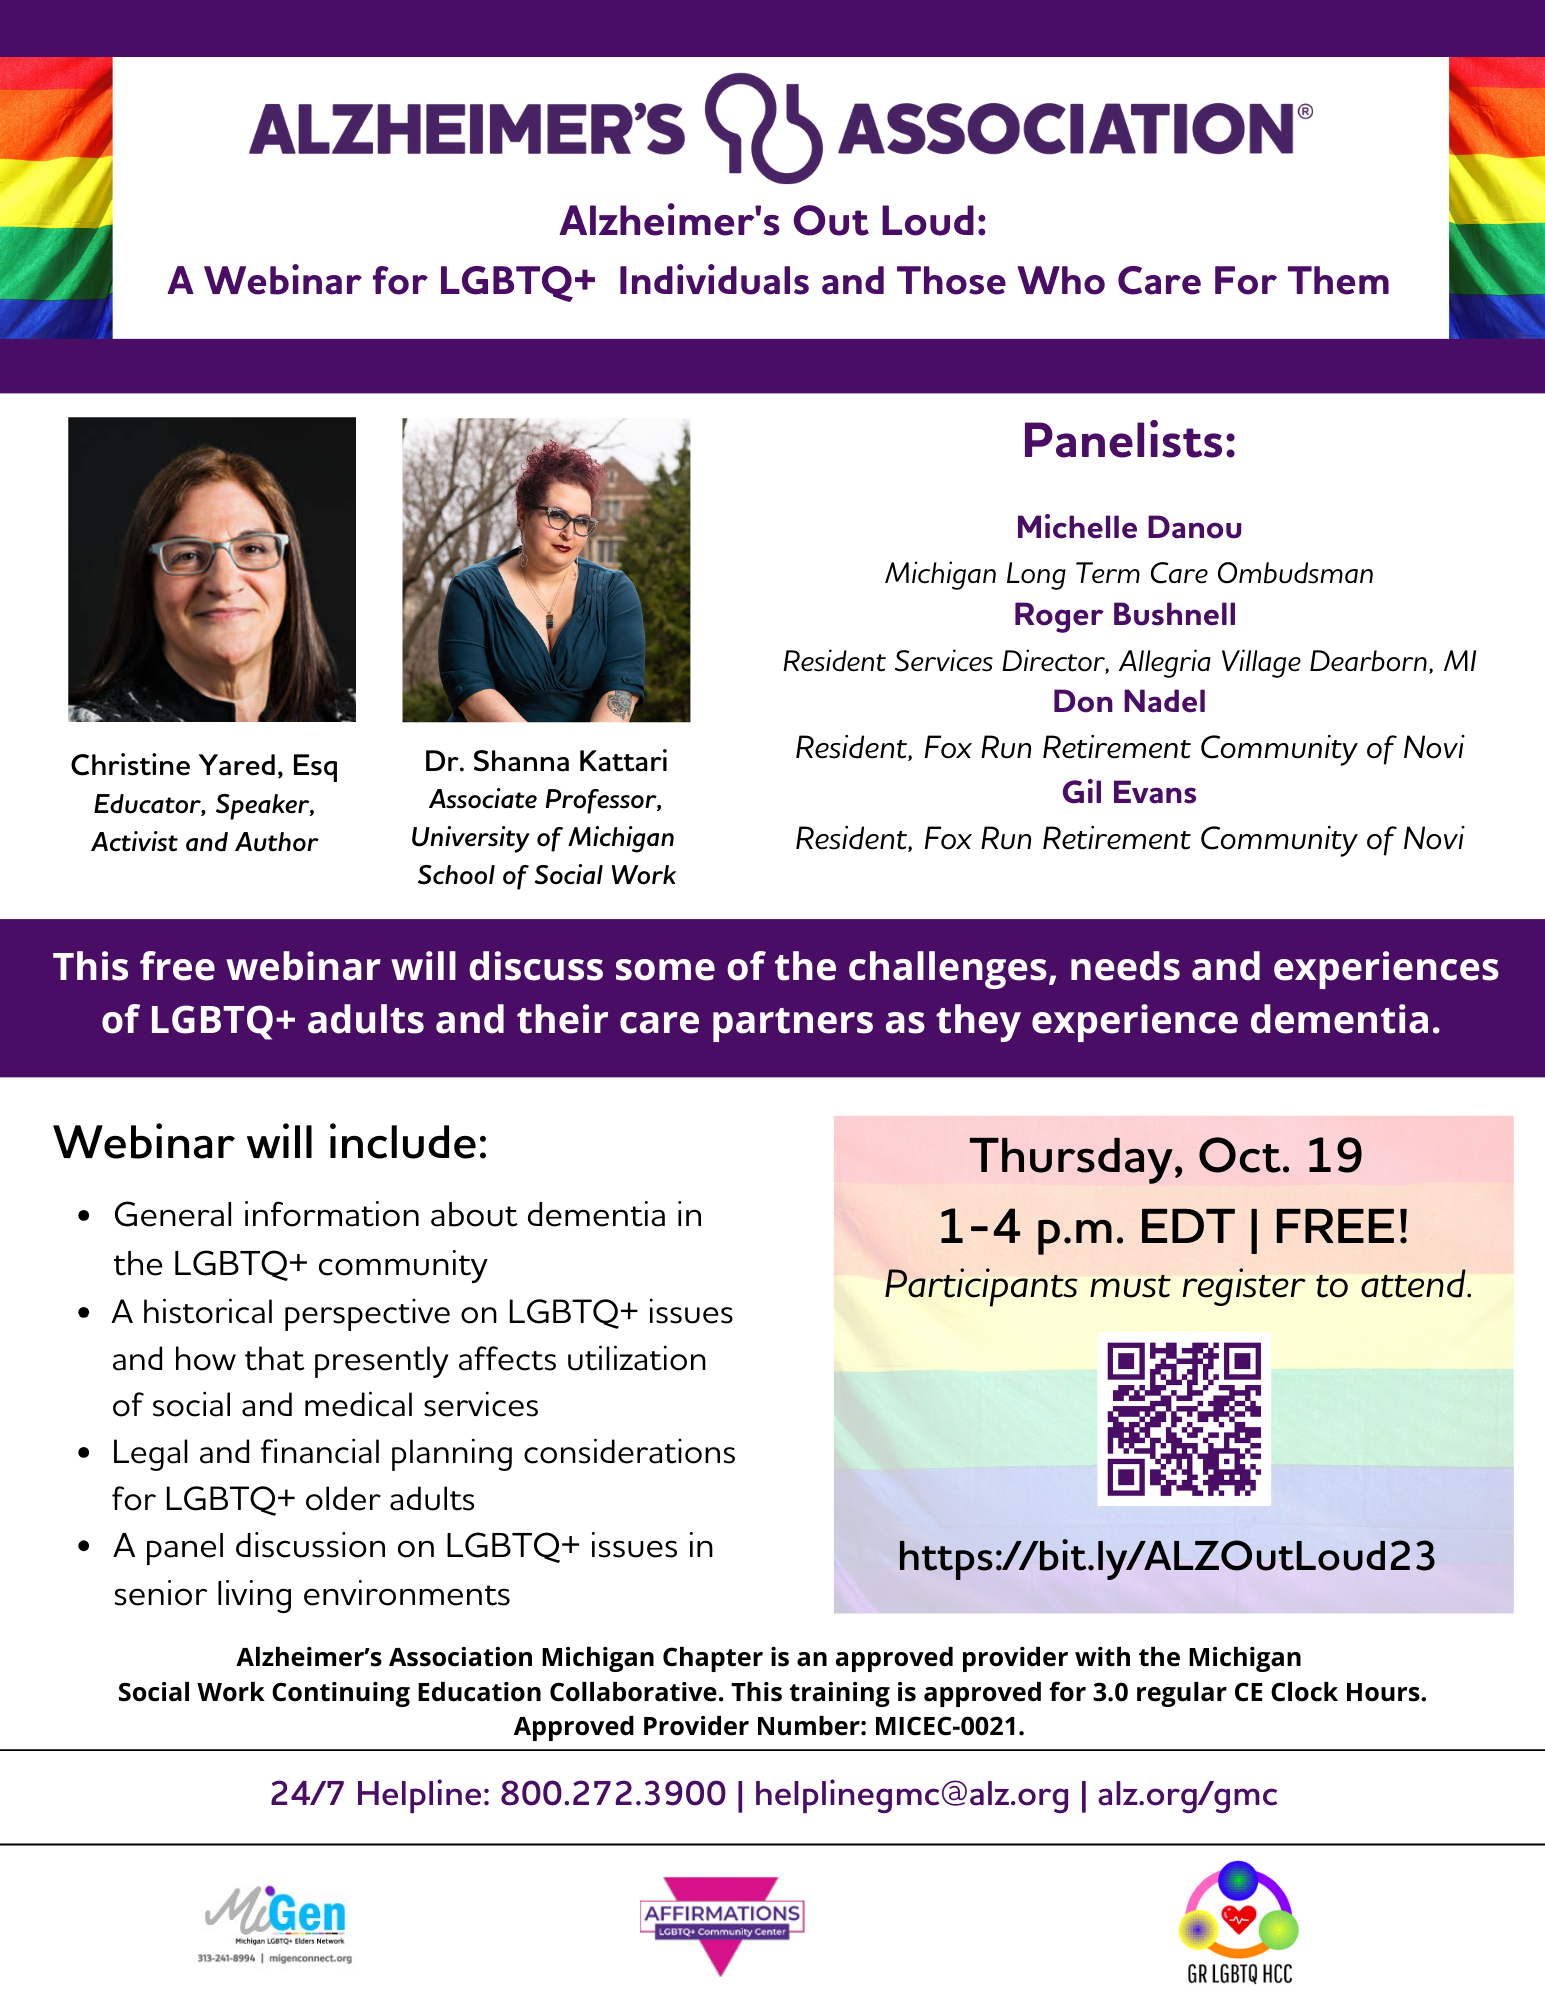 Flyer featuring information about the event and two headshots of two of the panelists.